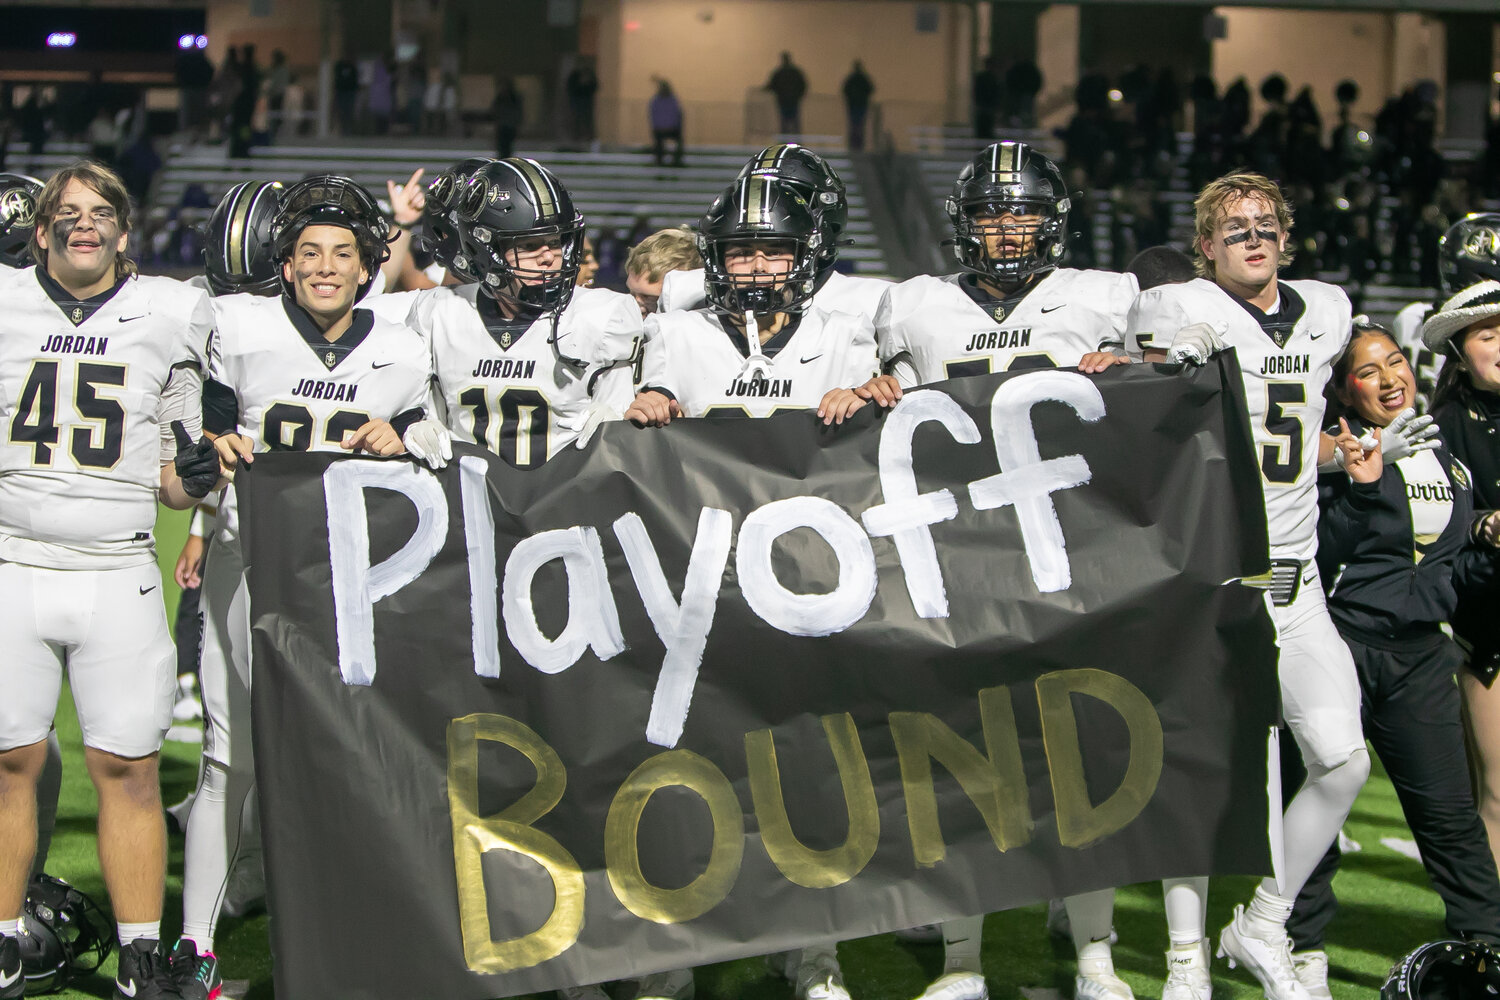 Jordan lifts a playoff banner after its game against Morton Ranch on Thursday at Legacy Stadium..